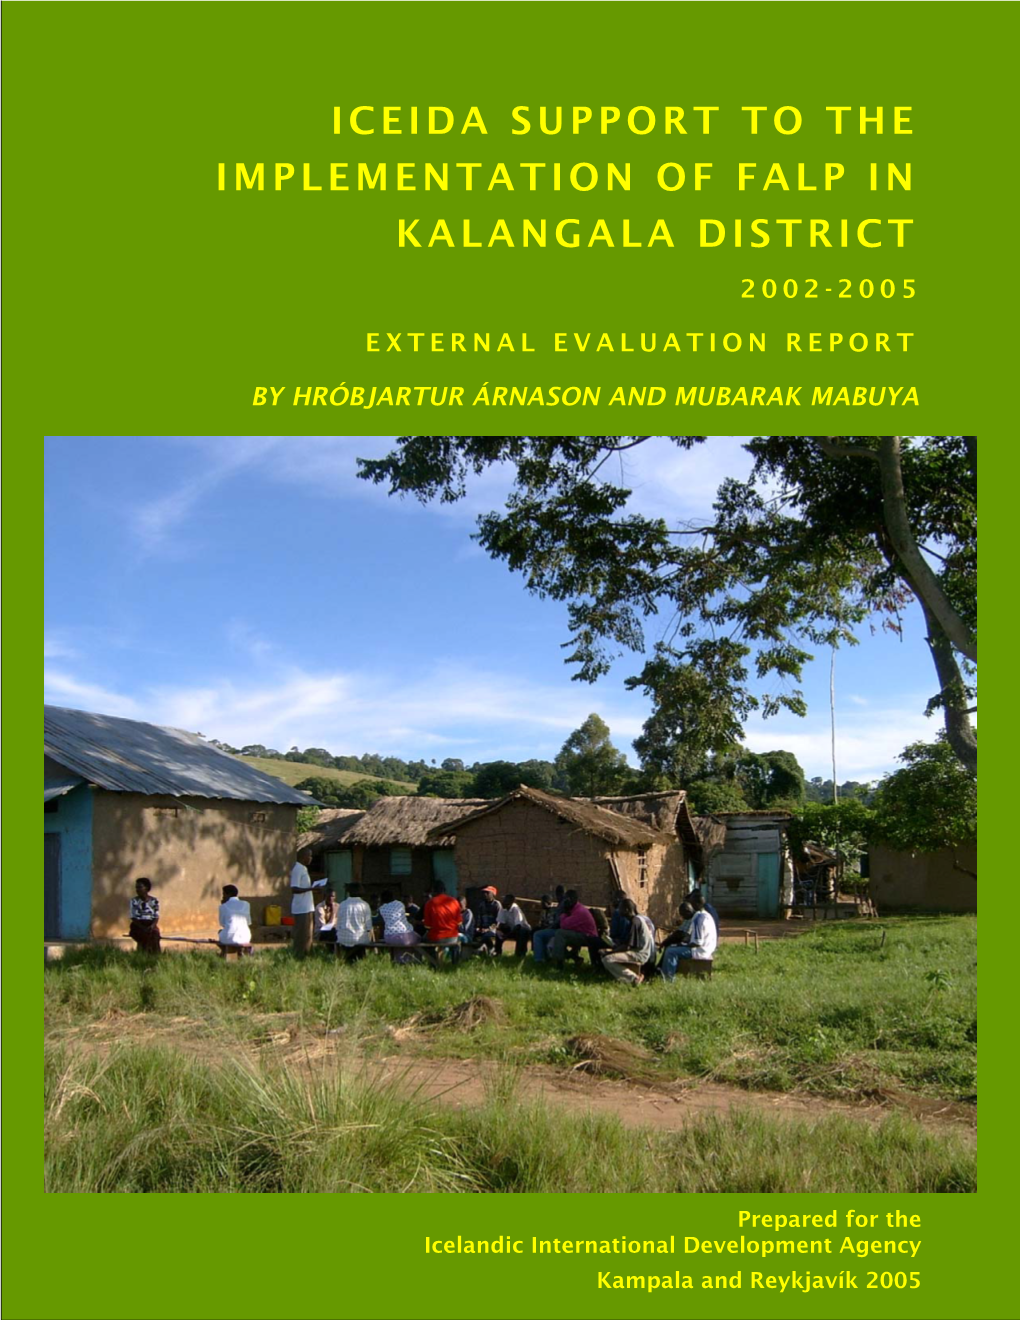 Iceida Support to the Implementation of Falp in Kalangala District 2002-2005